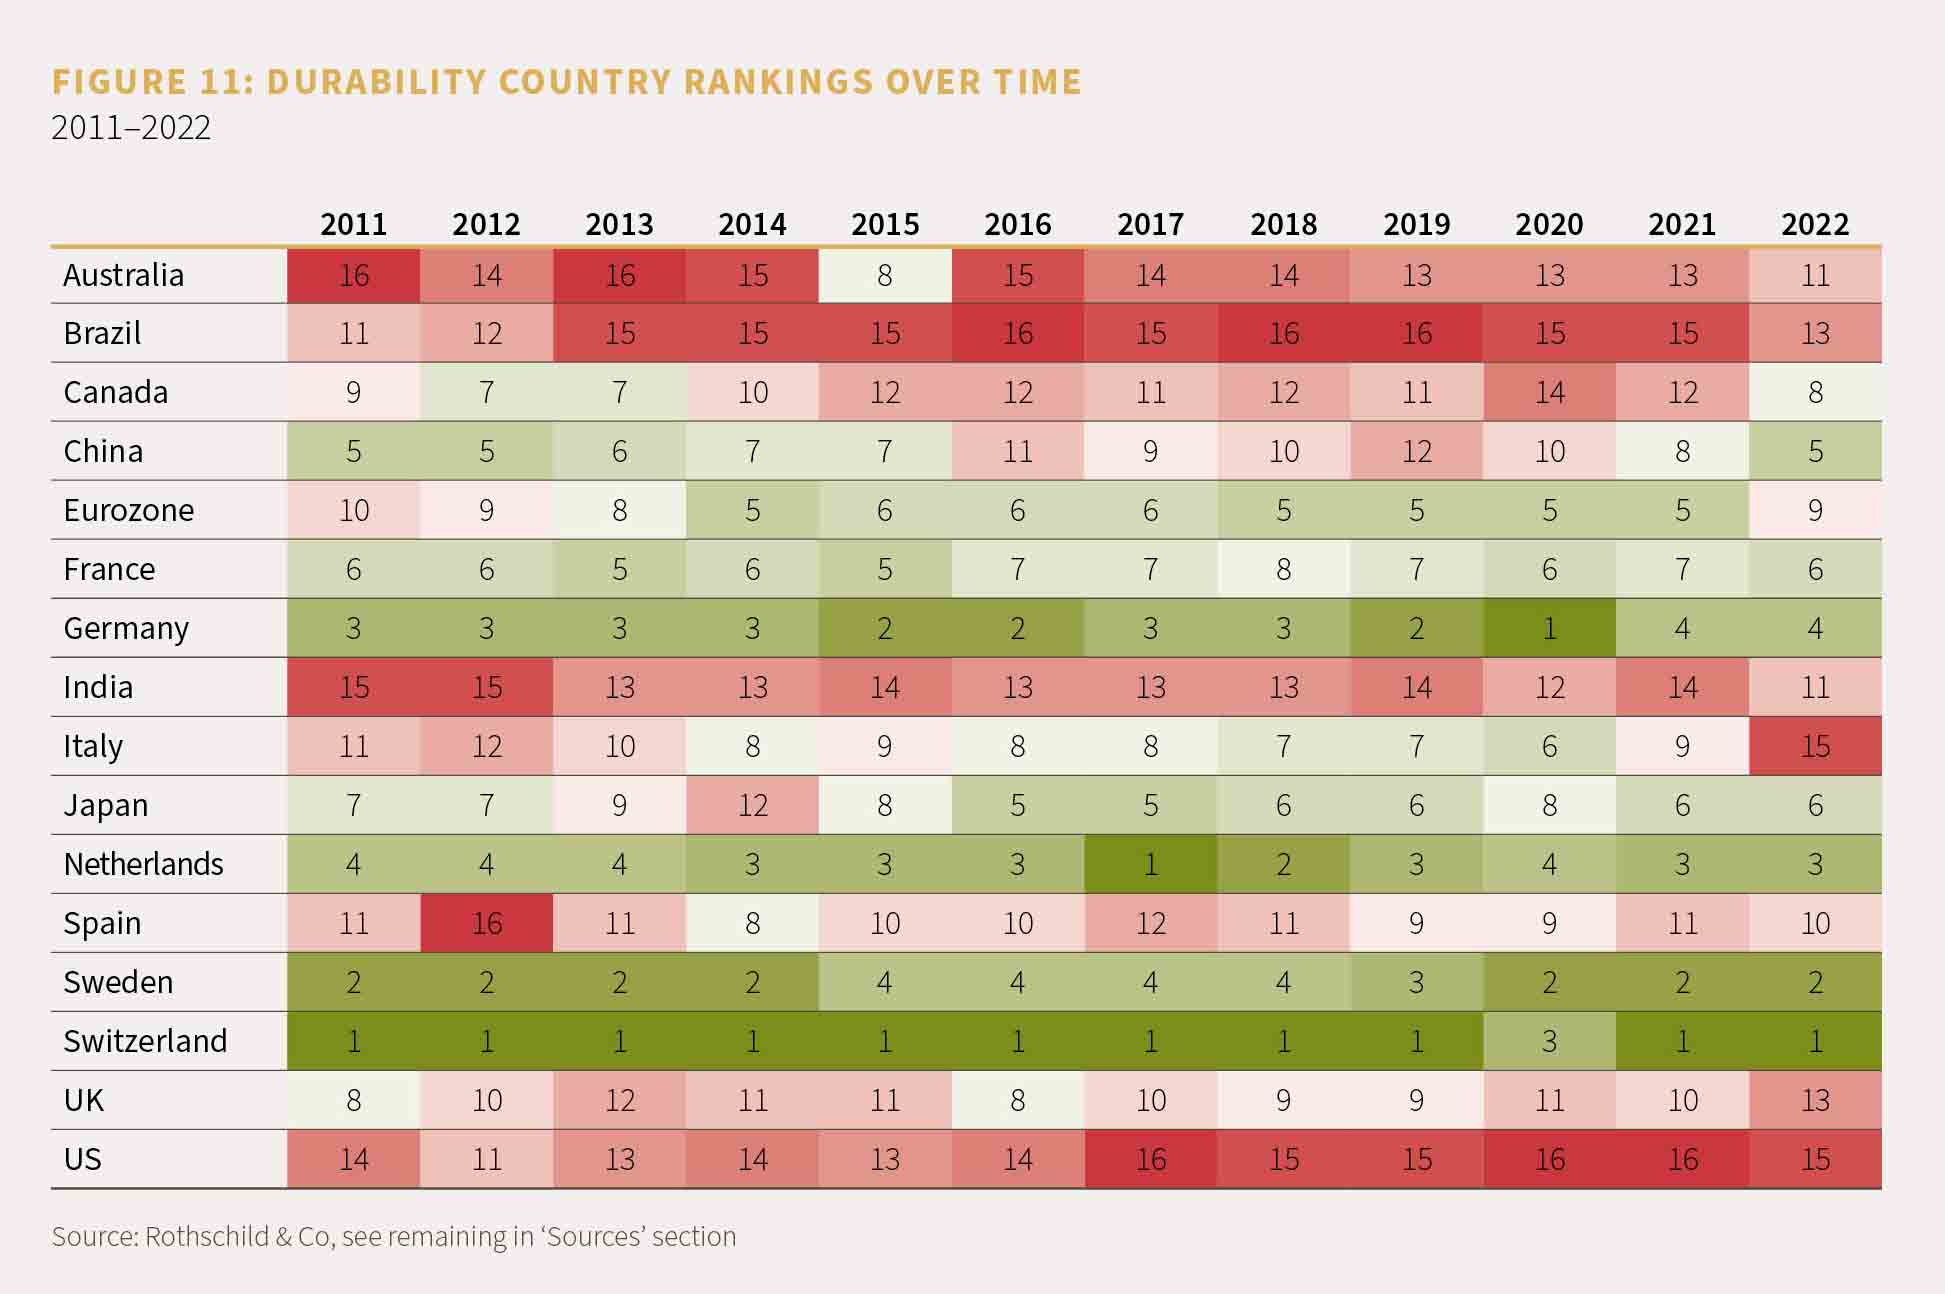 Chart showing the durability country rankings over time